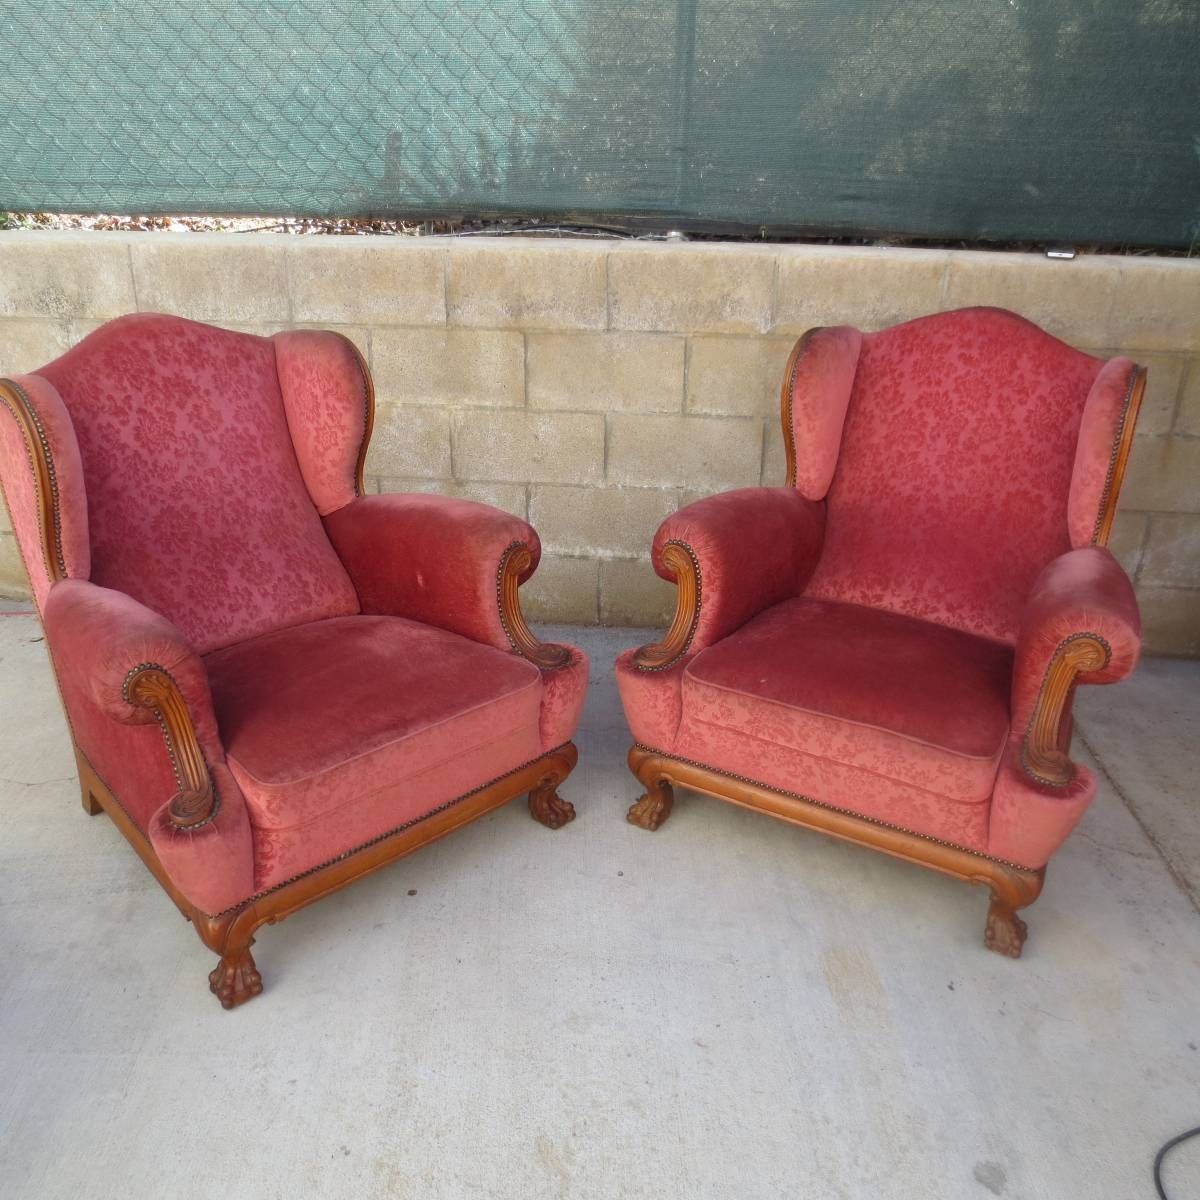 Antique Furniture, Antique Sofas, Antique Couches, Antique Living Intended For Antique Sofa Chairs (View 2 of 30)